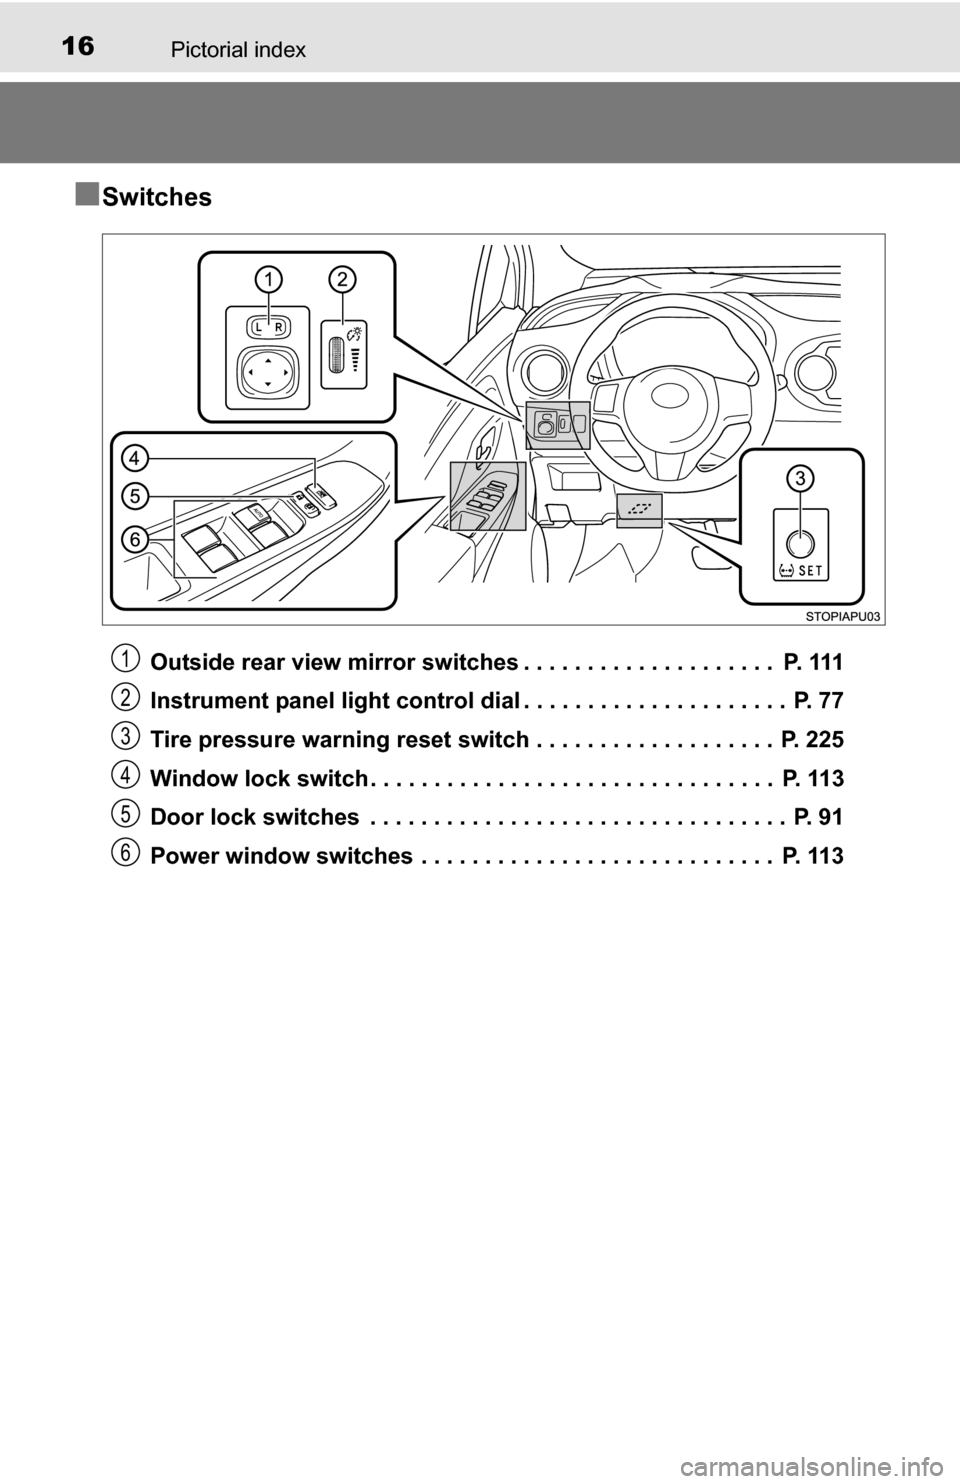 TOYOTA YARIS 2016 3.G User Guide 16Pictorial index
■Switches
Outside rear view mirror switches . . . . . . . . . . . . . . . . . . . .  P. 111
Instrument panel light control dial . . . . . . . . . . . . . . . . . . . . .  P. 77
Tir